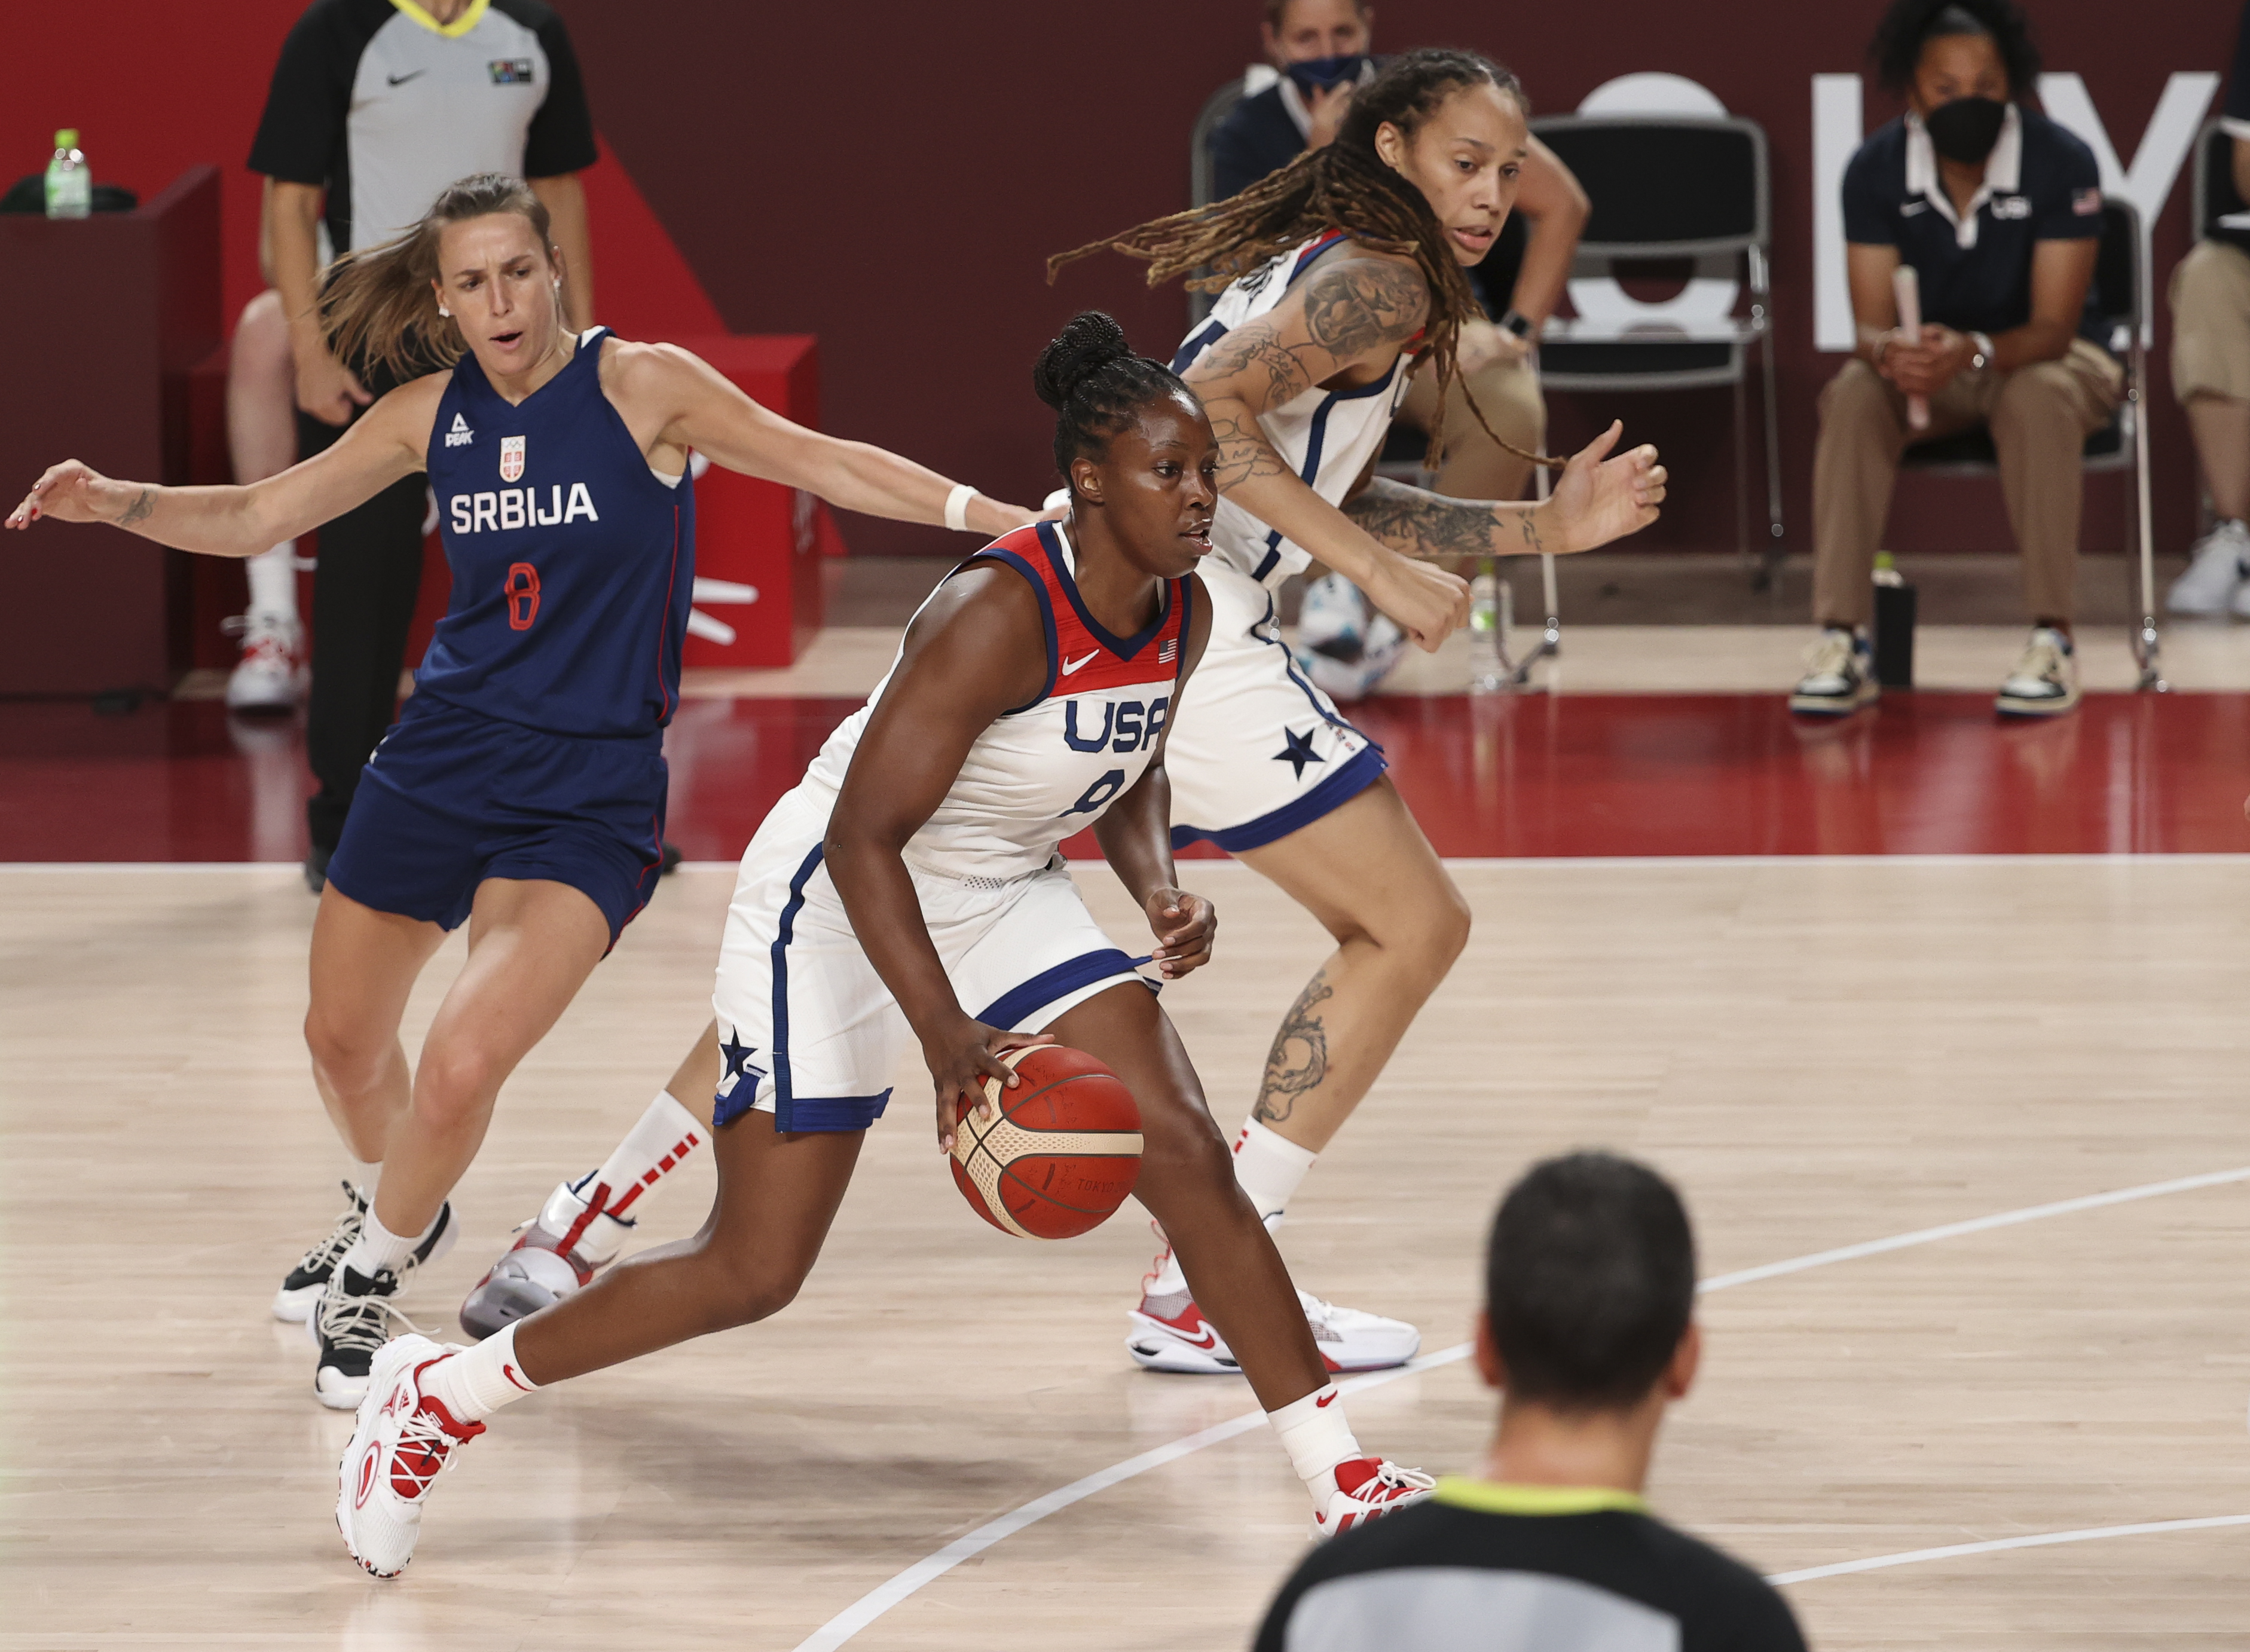 Chelsea Gray, Brittney Griner of USA, Nevena Jovanovic of Serbia (left) during the Women’s Semifinal Basketball game between United States and Serbia on day fourteen of the Tokyo 2020 Olympic Games at Saitama Super Arena on August 6, 2021 in Saitama, Japan.